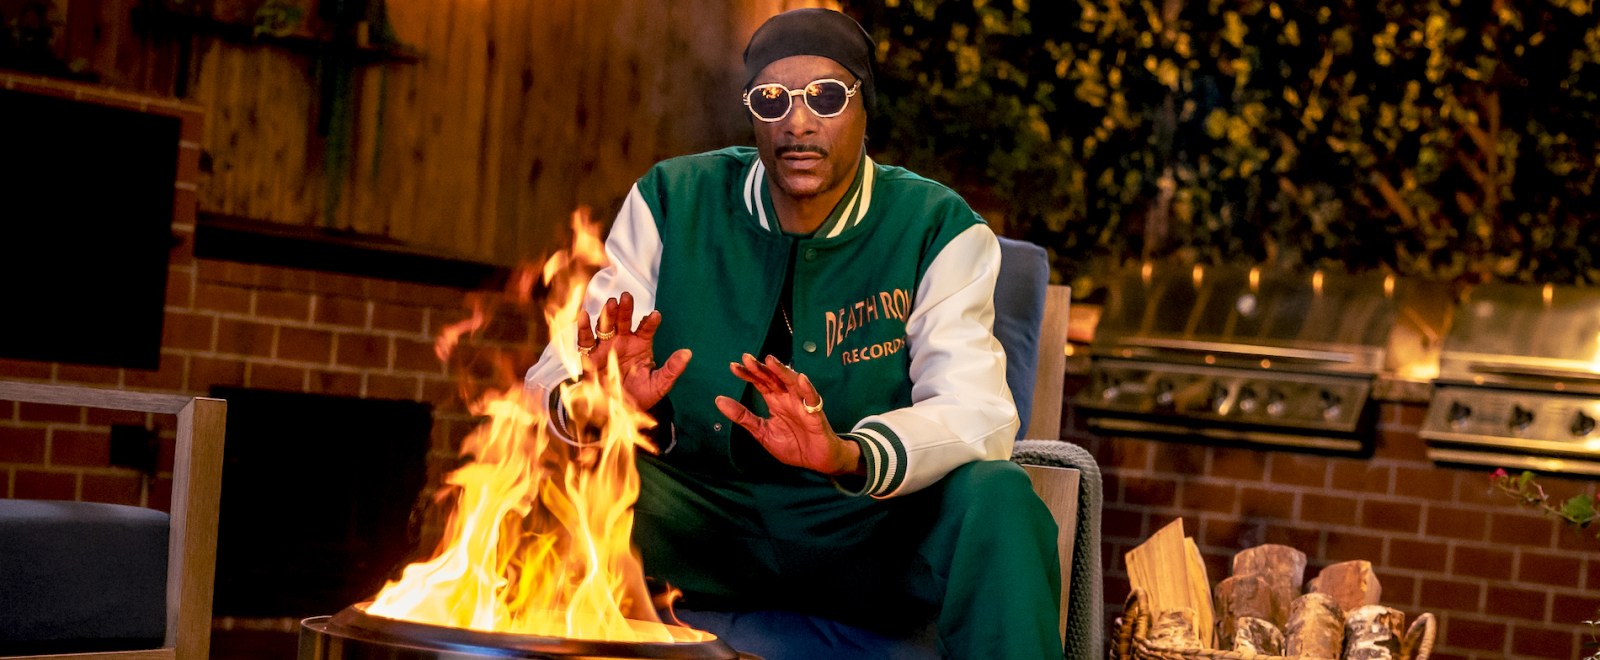 Even Snoop Dogg’s Viral ‘Give Up Smoke’ Ad Couldn’t Save The CEO’s Job From Going Up In Flames #SnoopDogg